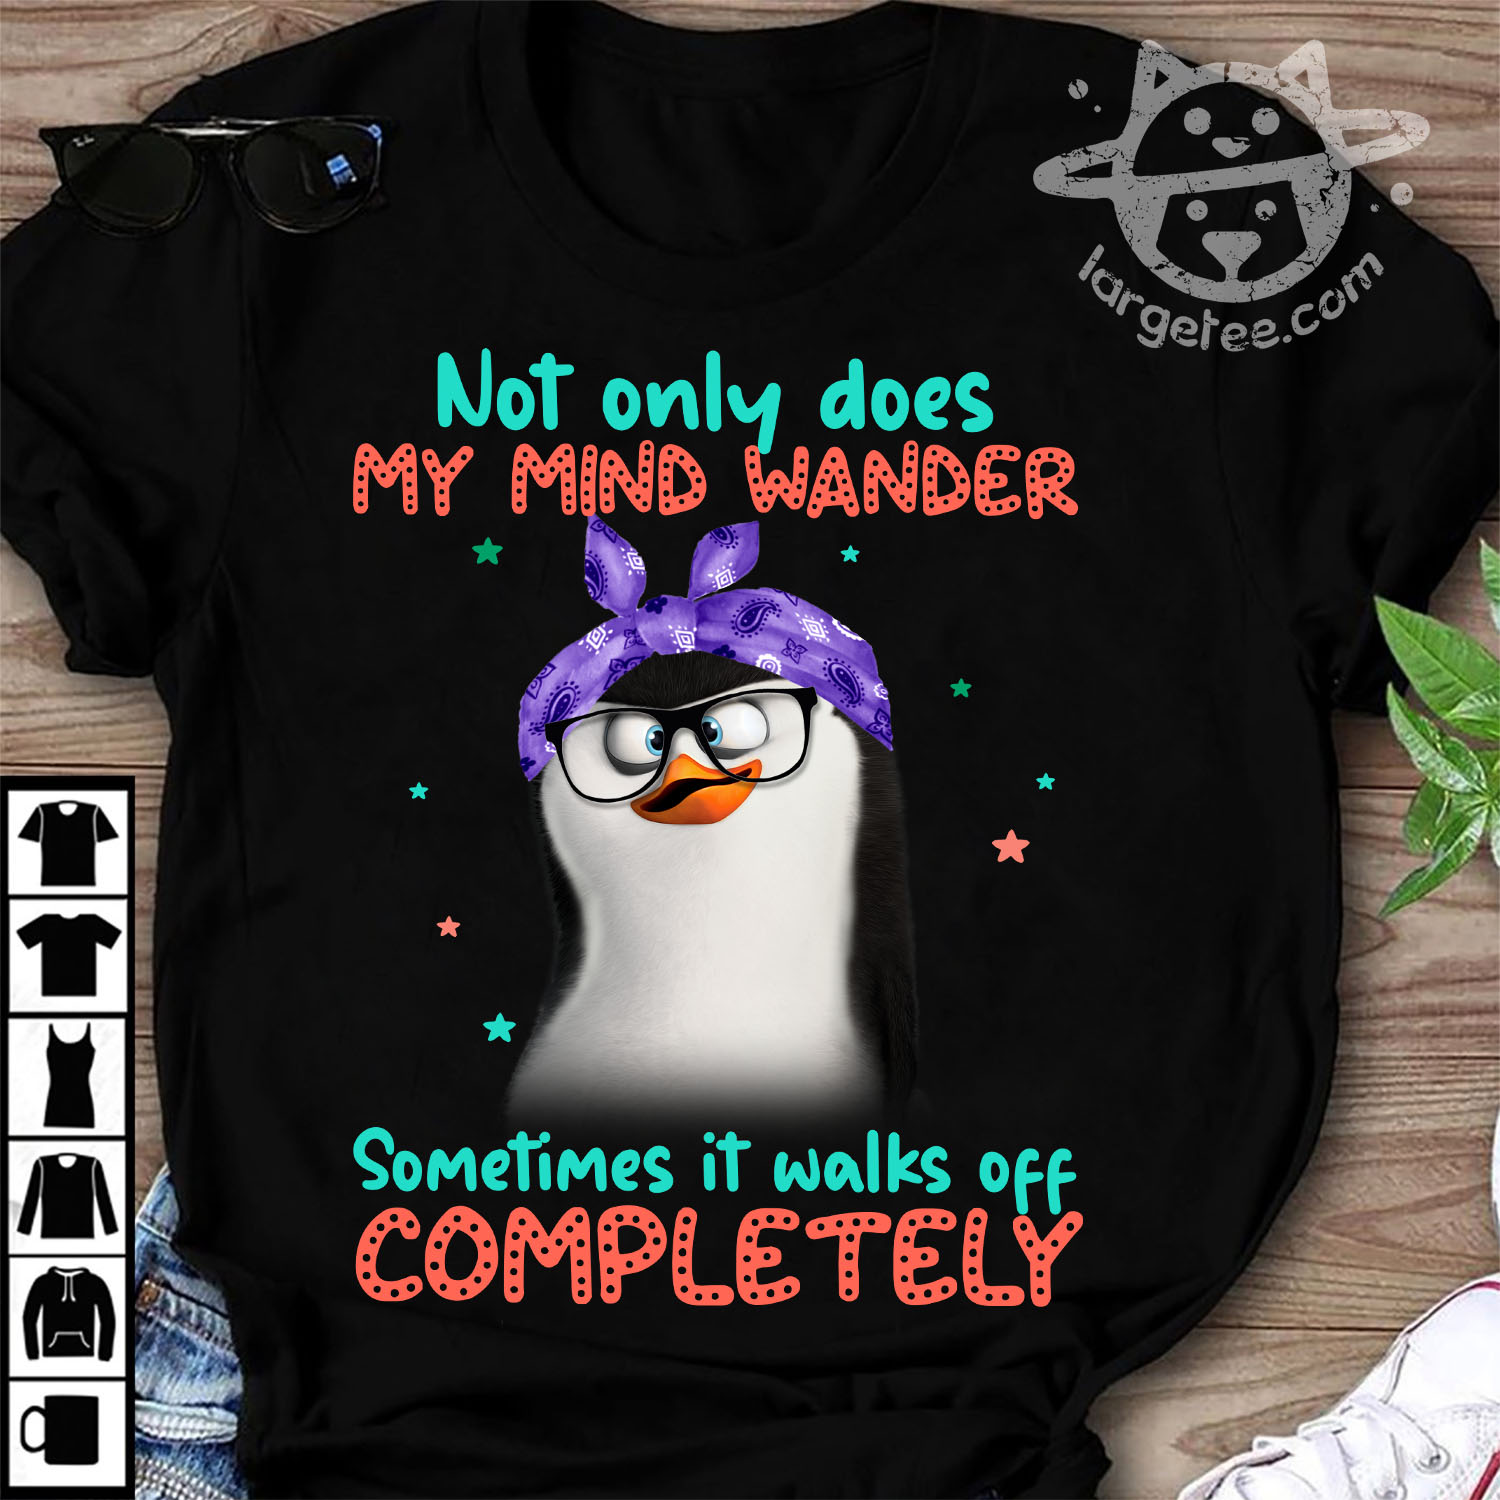 Not only does my mind wander - Grumpy penguin